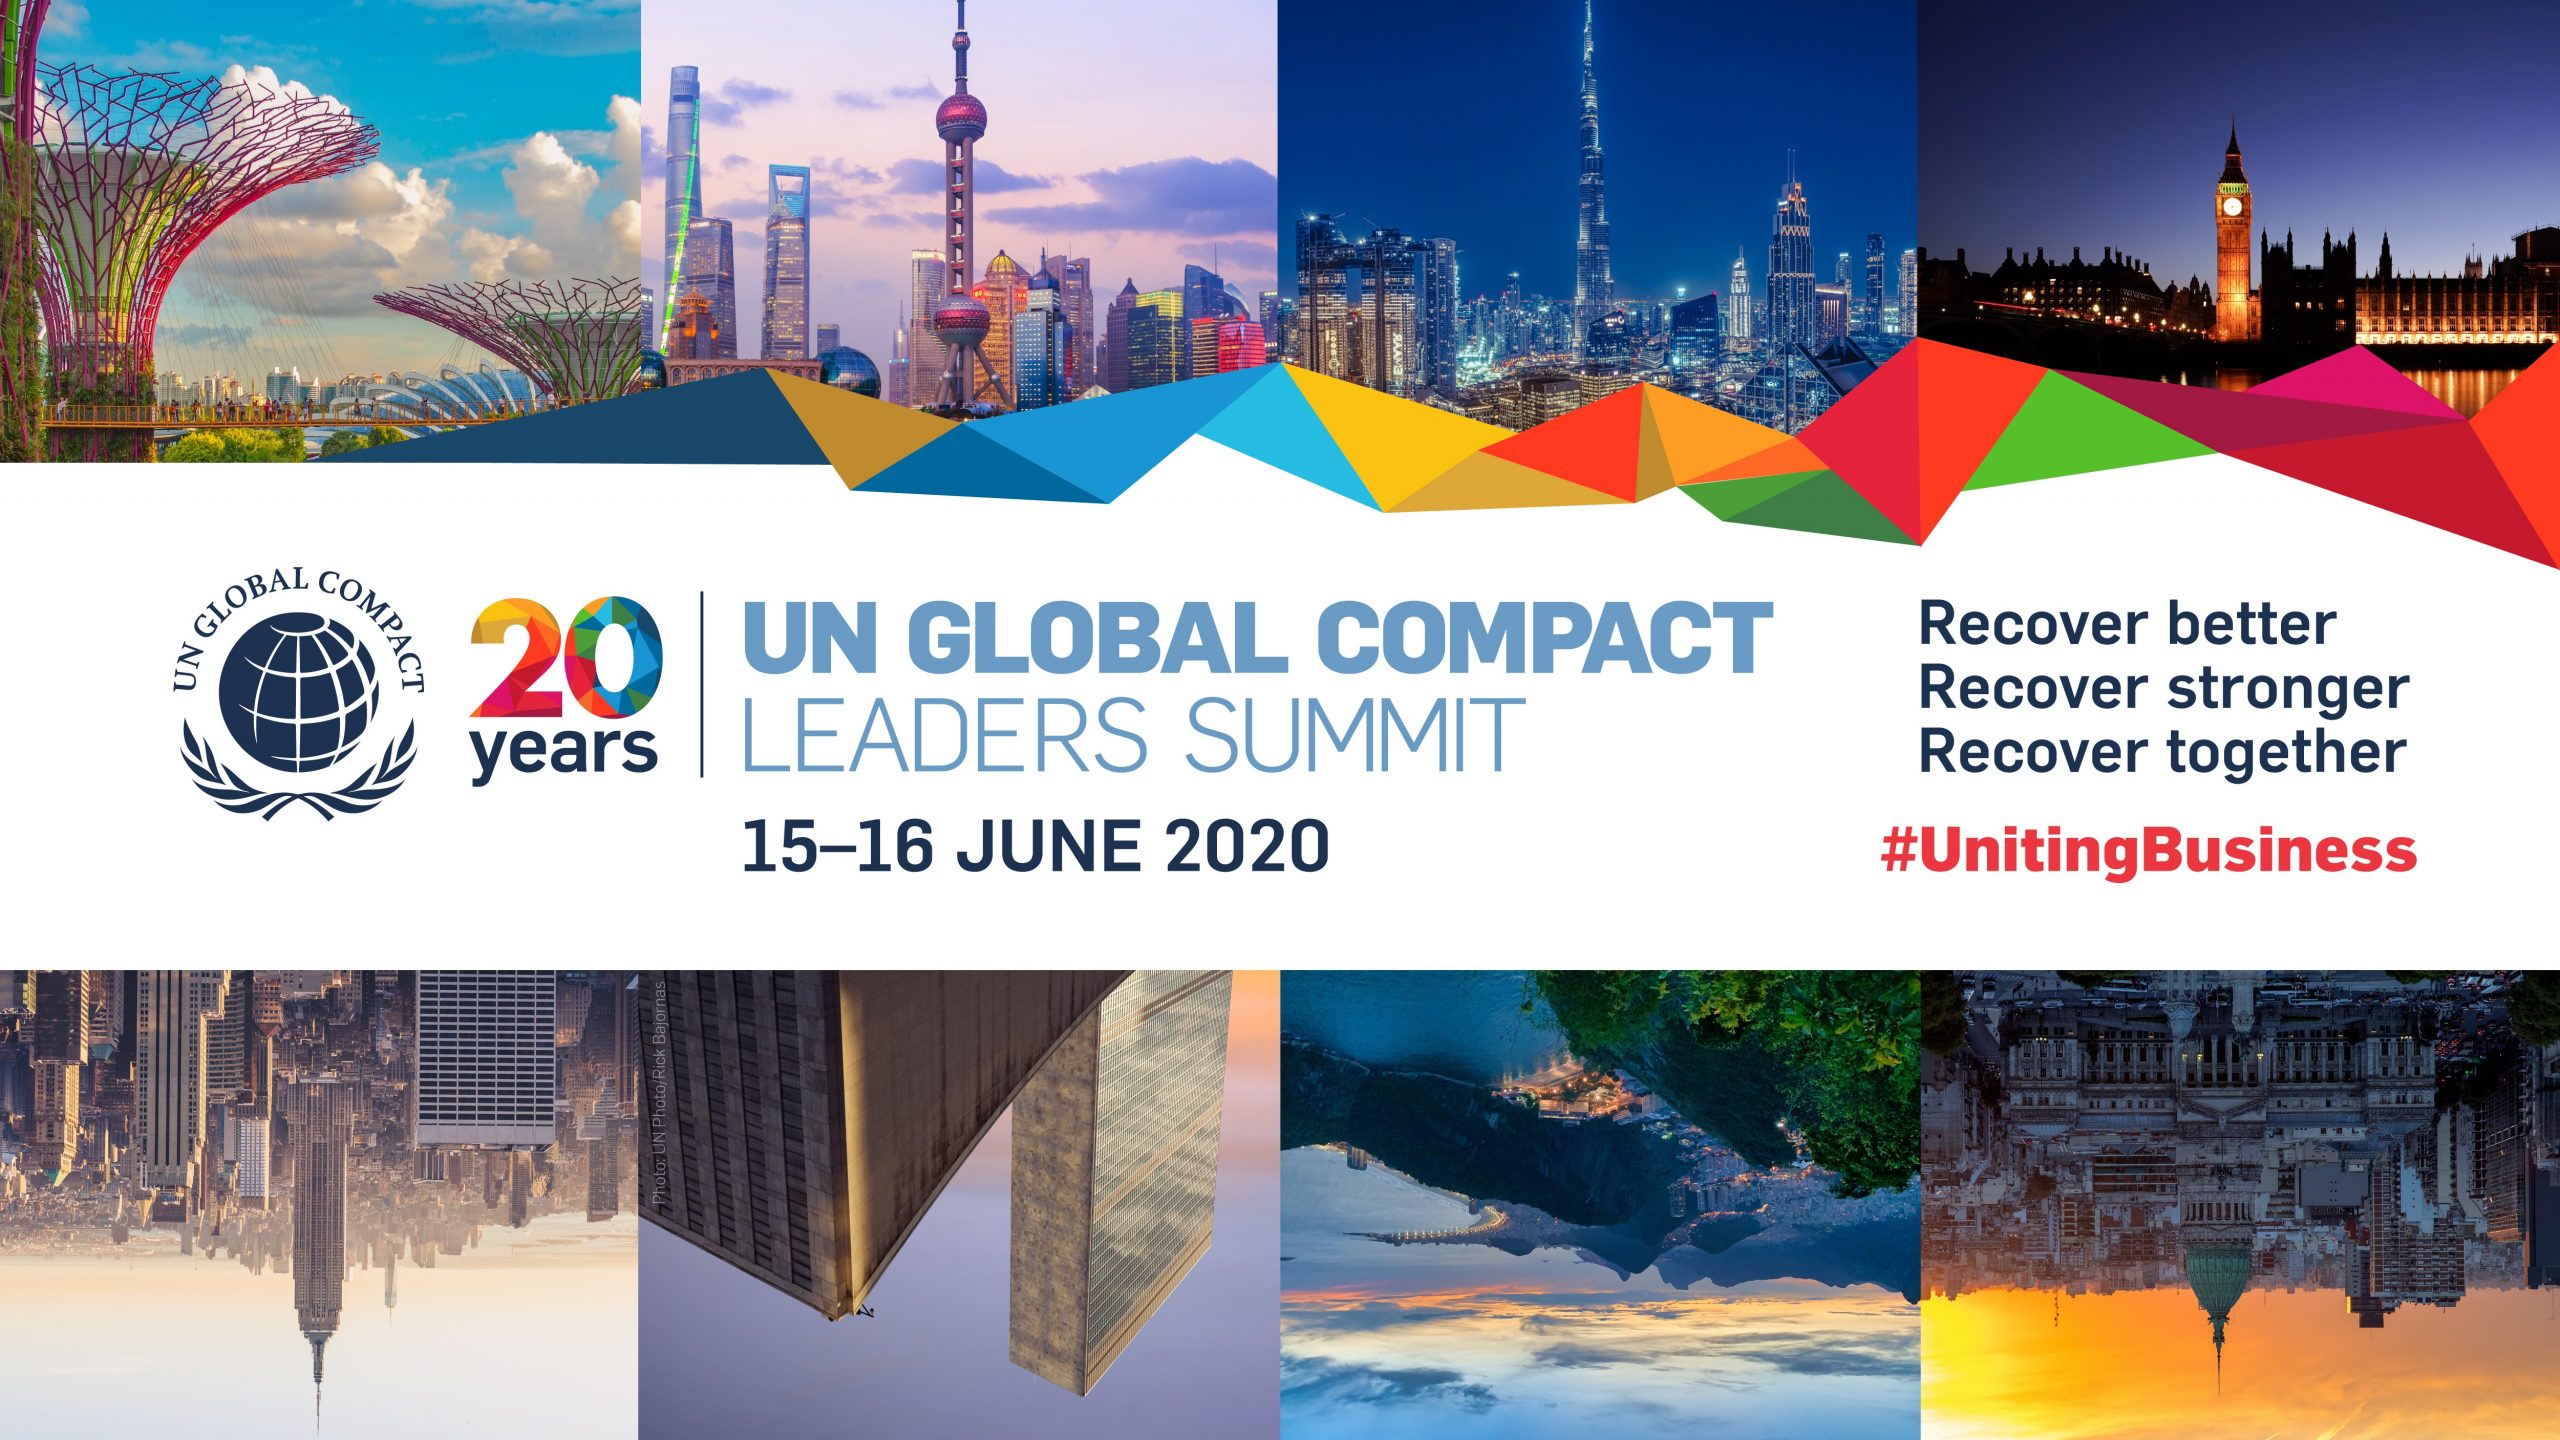 The Institute invited to participate in the UN Global Compact’s 20th anniversary Leaders Summit online